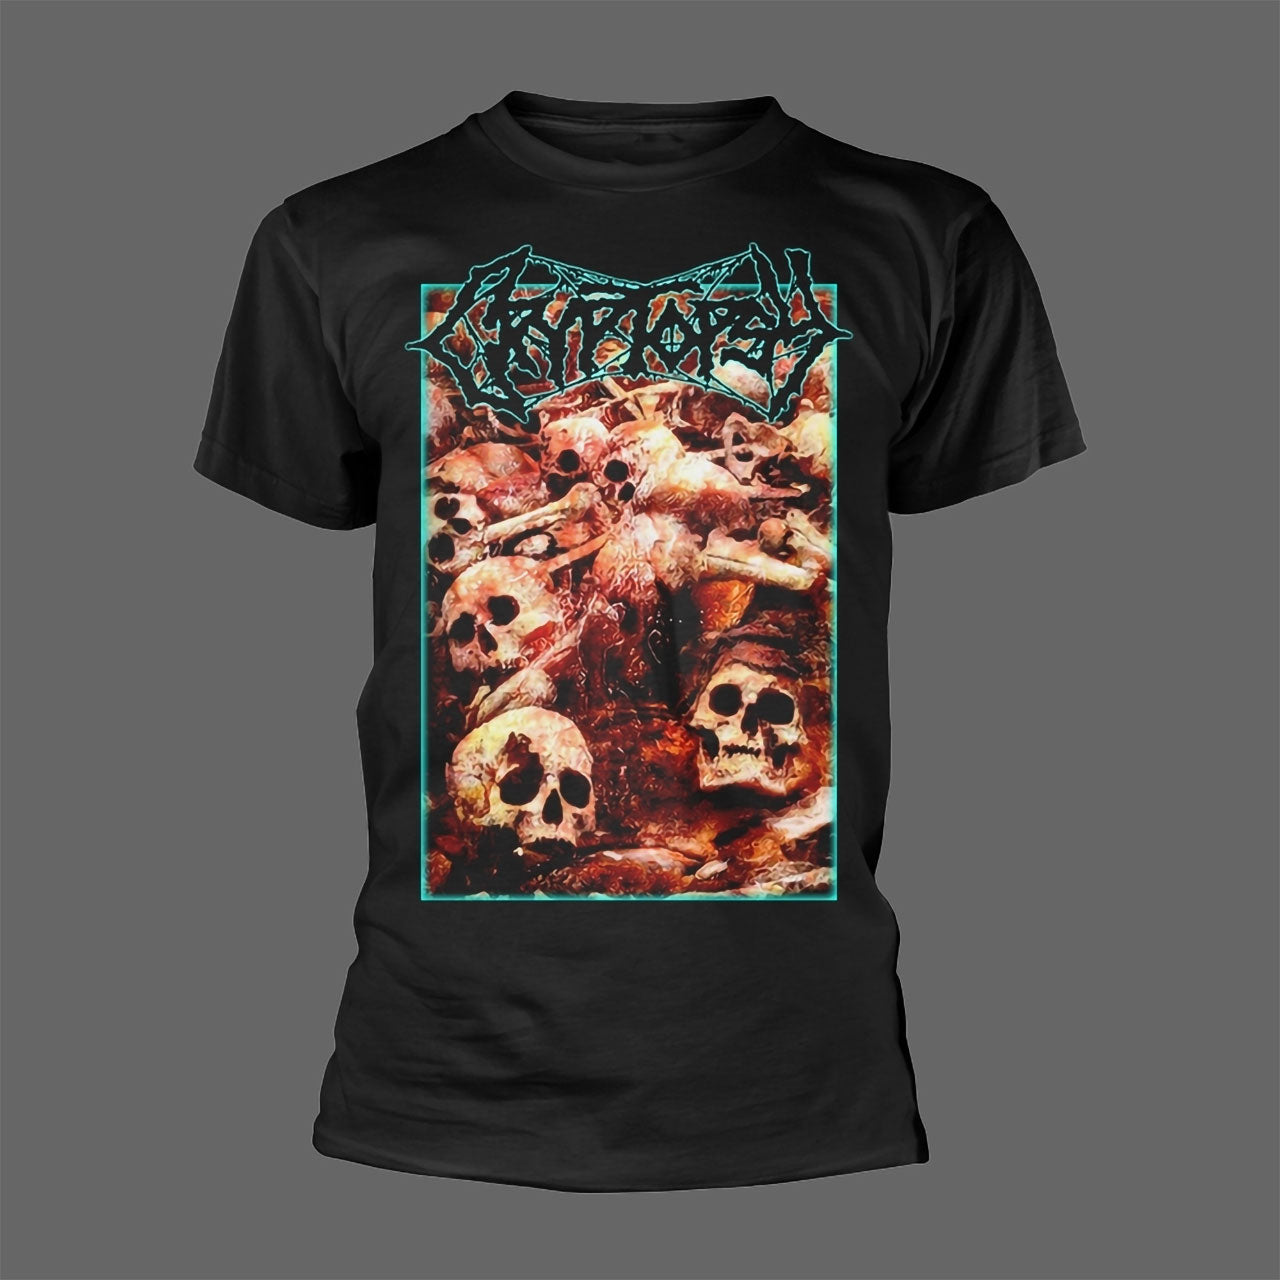 Cryptopsy - I Belong in the Grave (T-Shirt)